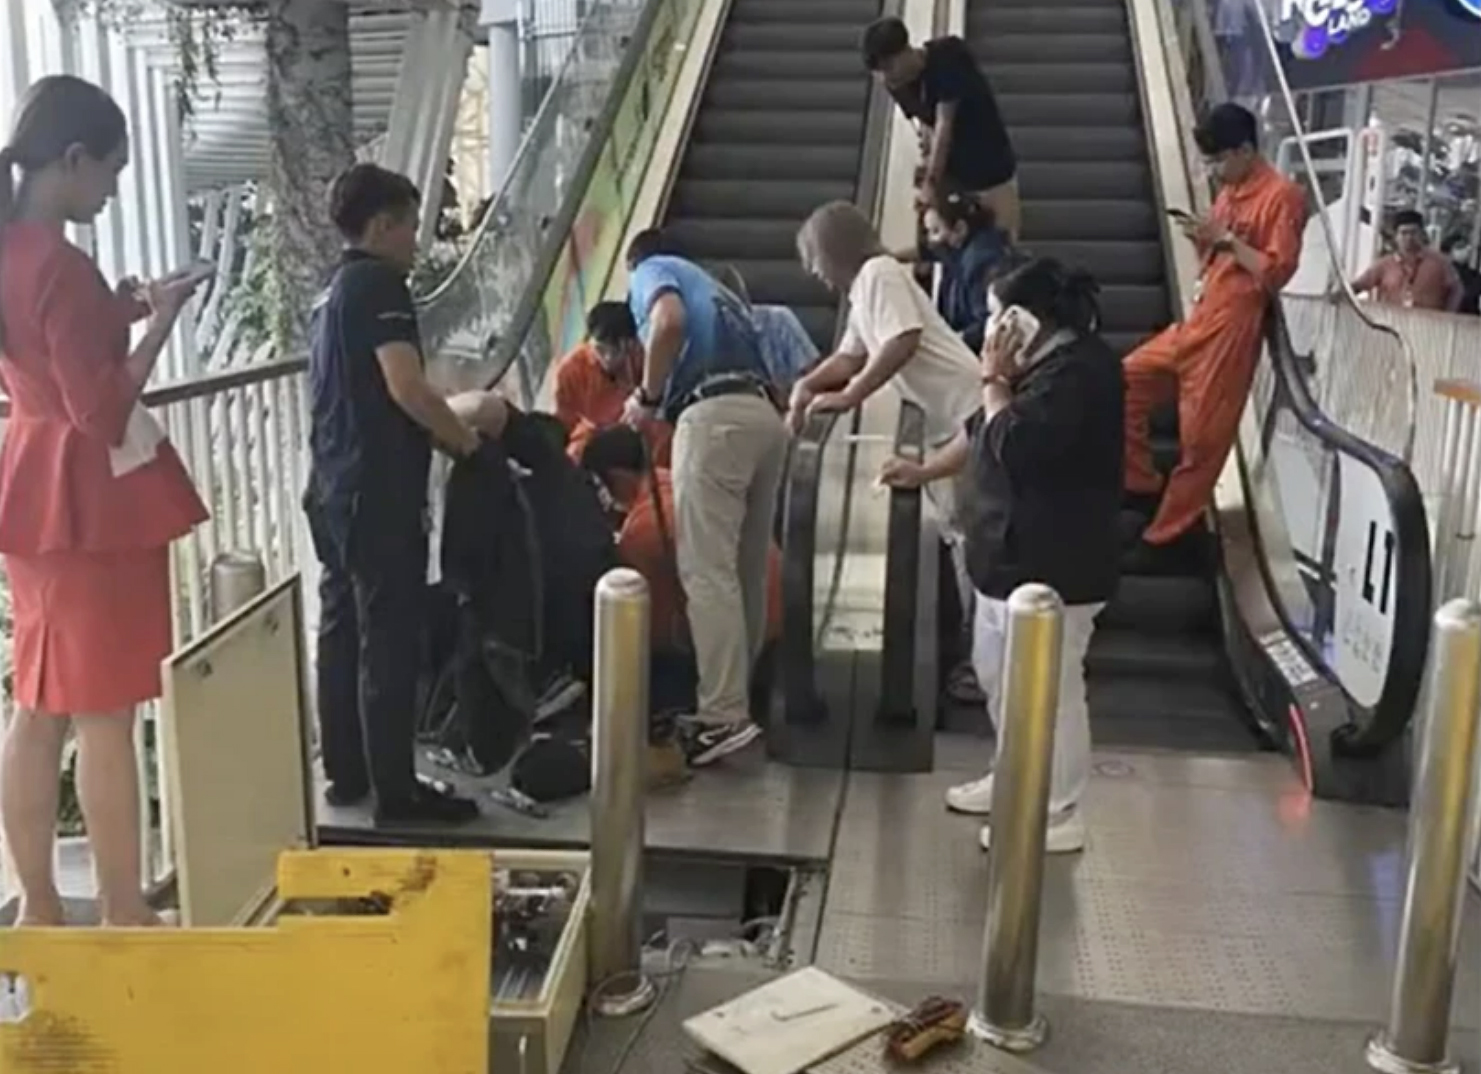 4-Year-Old Girl Rescued After Her Foot Caught in Escalator